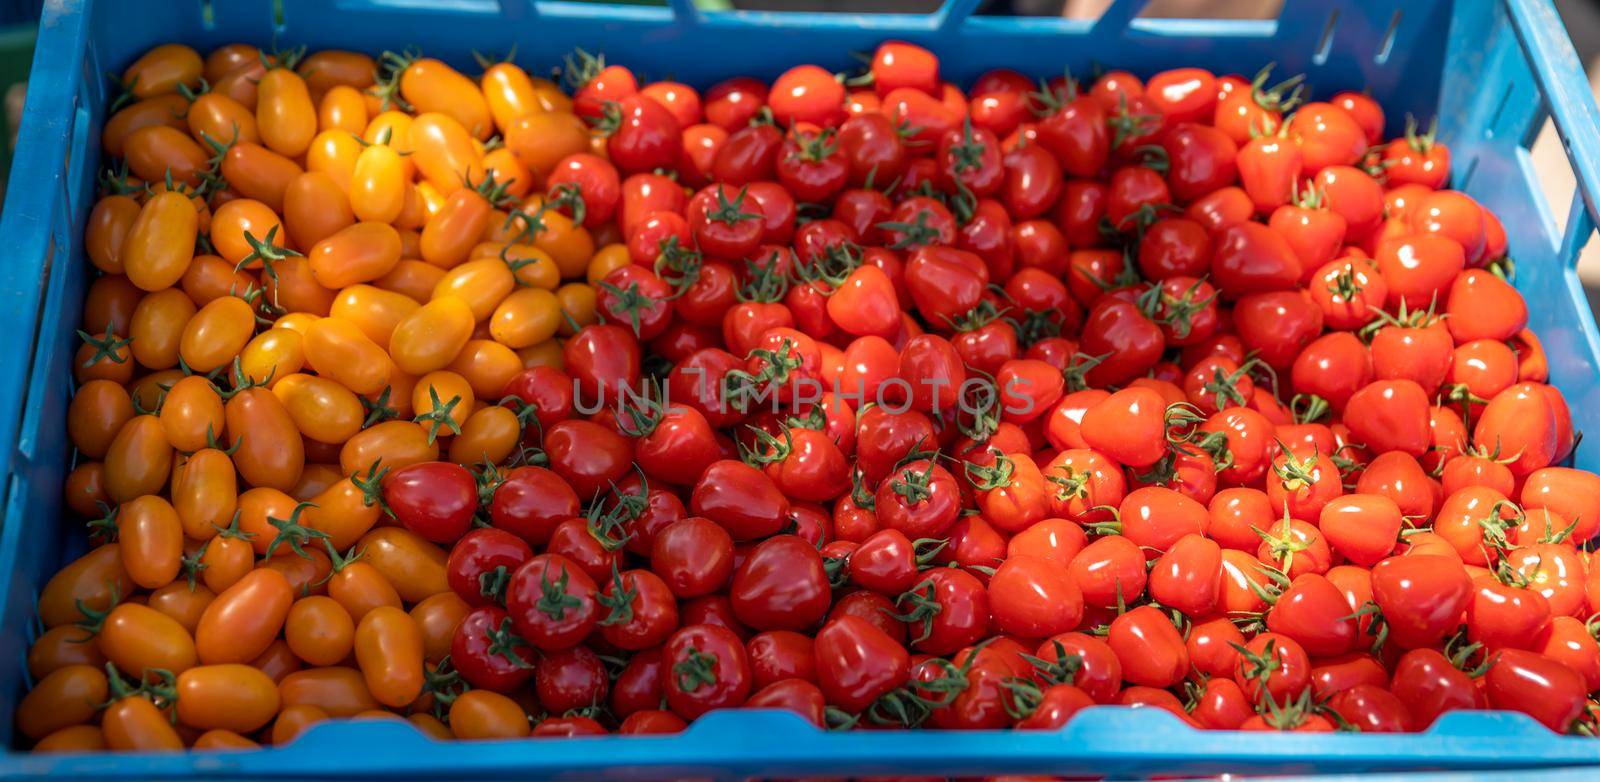 freshly picked red tomatoes in a crate.